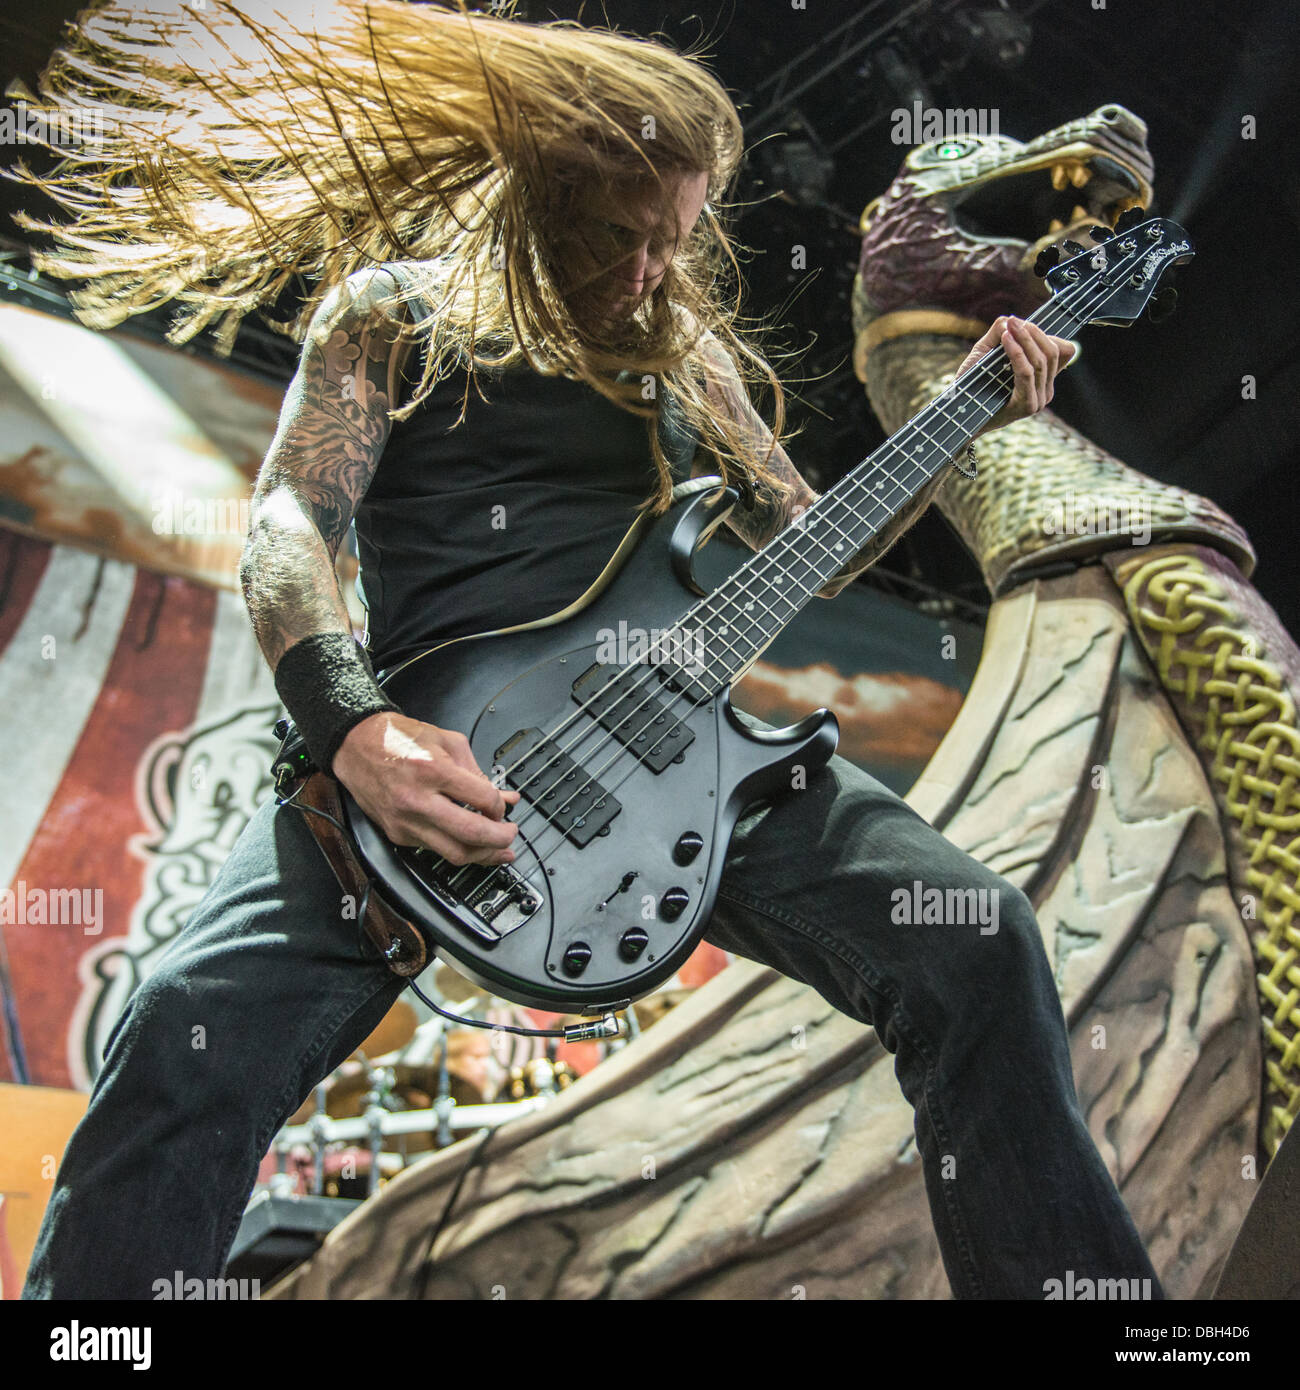 Swedish Heavy Metal band Amon Amarth performing live at Mayhem Fest 2013. Amon Amarth is a melodic death metal band from Tumba, Sweden. They got their moniker from the Sindarin name of Mount Doom, a volcano in J. R. R. Tolkien′s Middle-earth. The band's lyrics revolve around Viking history and mythology. The band is vocalist Johan Hegg, guitarists Olavi Mikkonen and Johan Söderberg, bassist Ted Lundström and drummer Fredrik Andersson Stock Photo